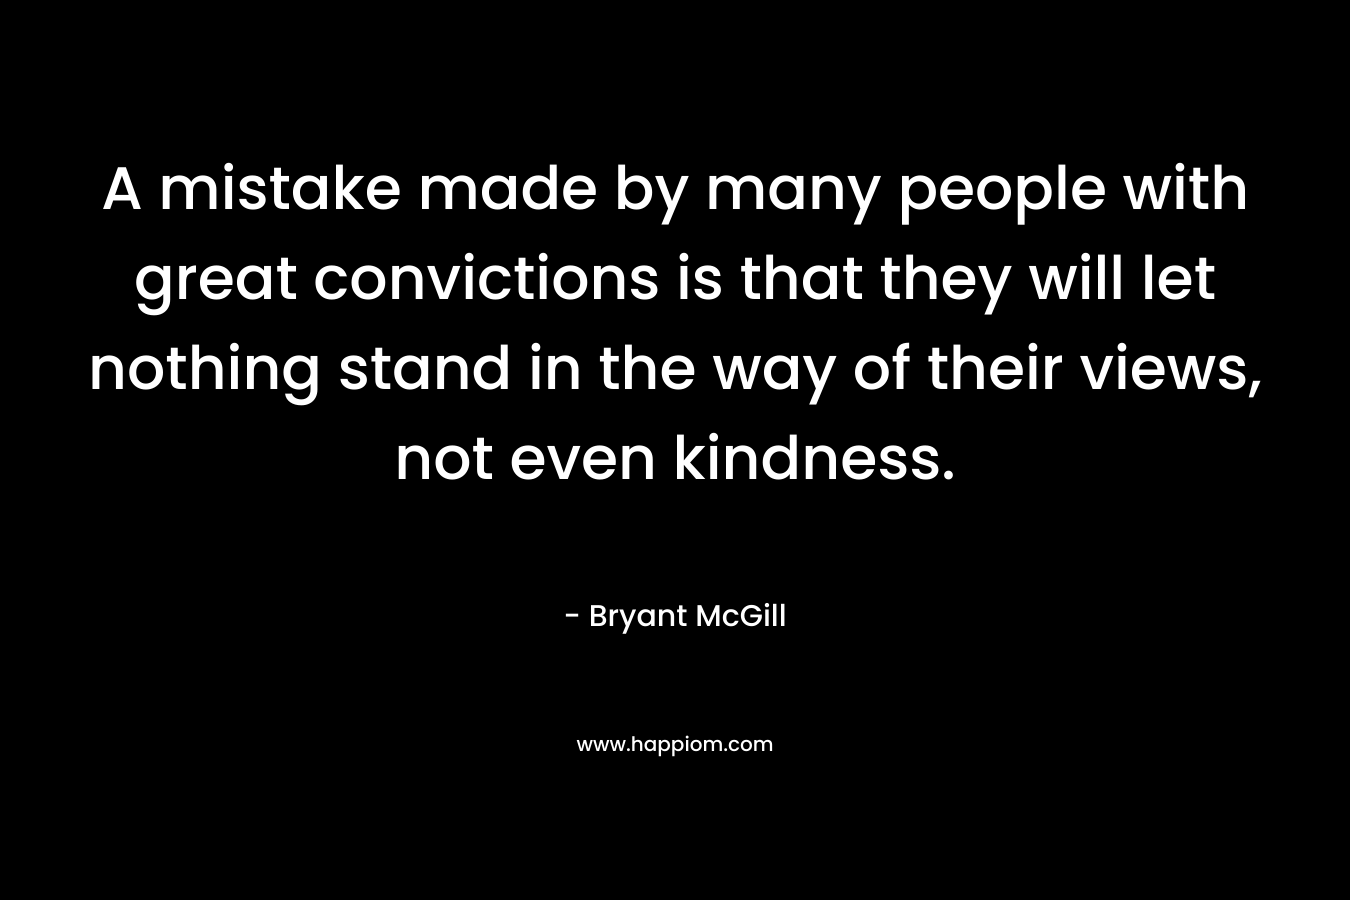 A mistake made by many people with great convictions is that they will let nothing stand in the way of their views, not even kindness. – Bryant McGill